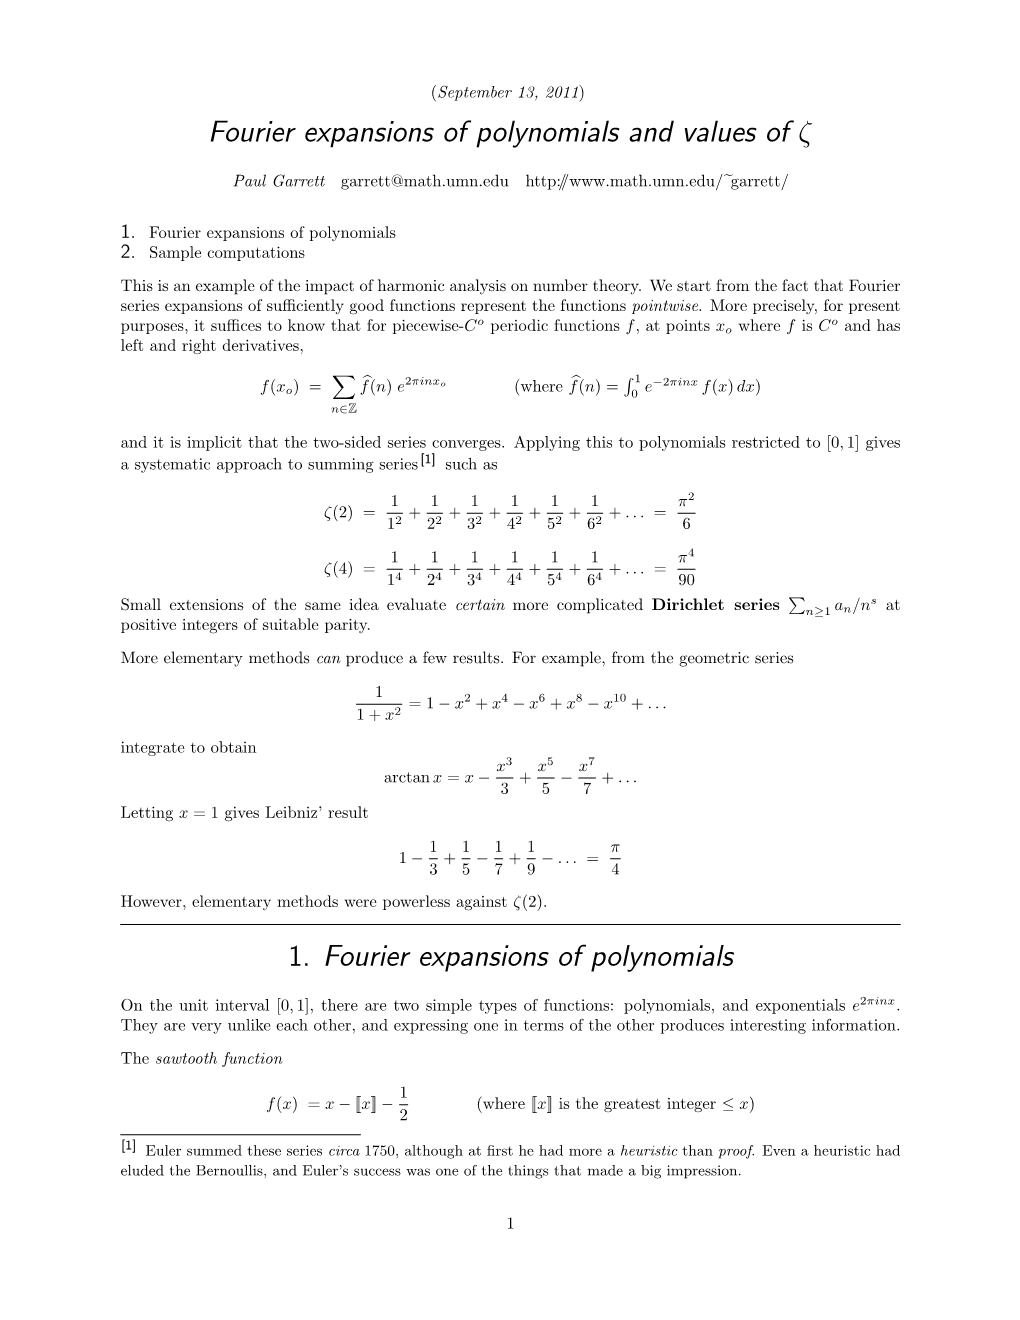 Fourier Expansions of Polynomials and Values of Ζ